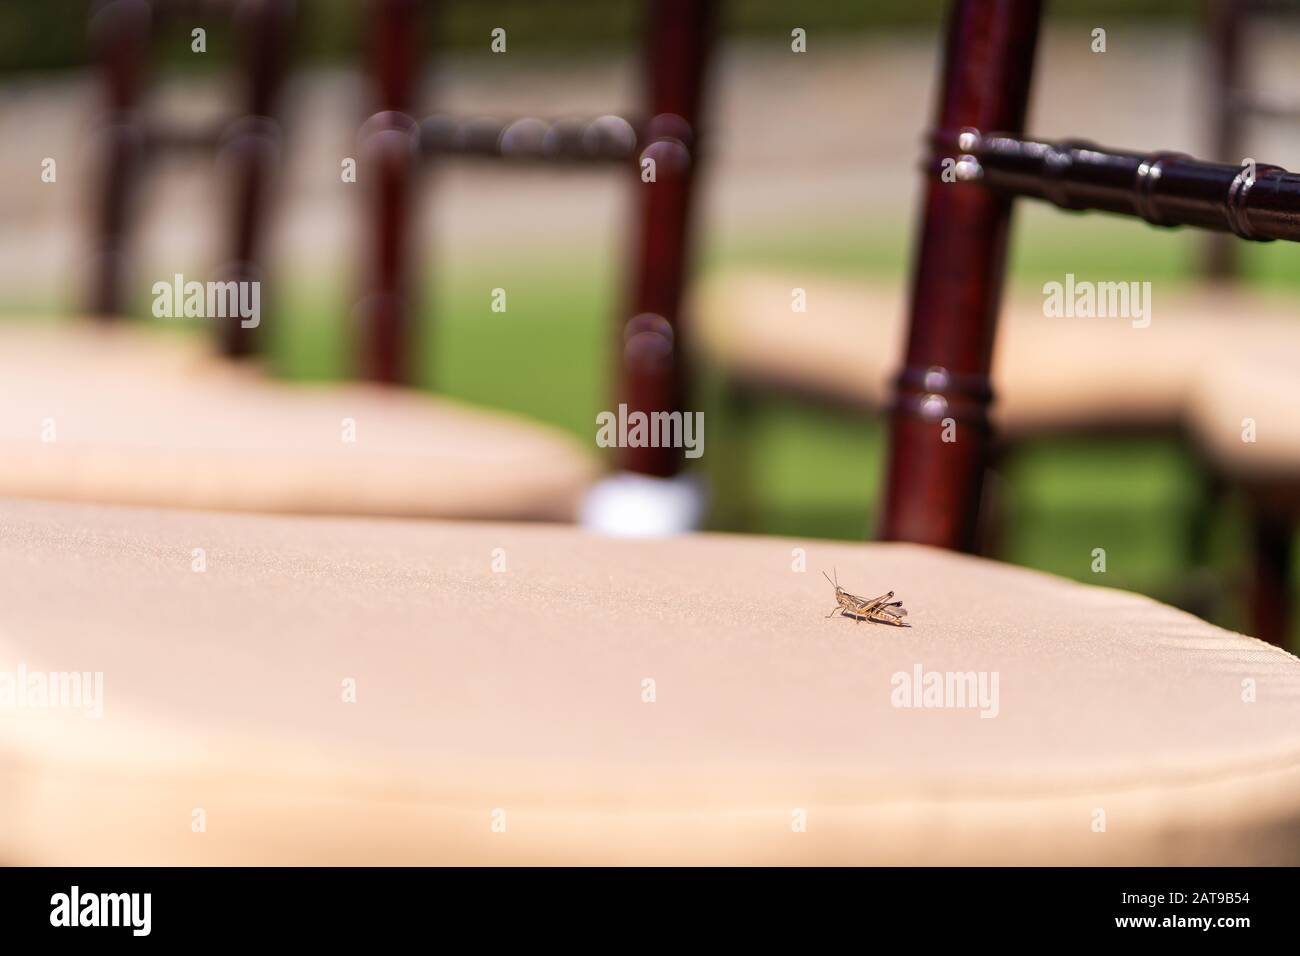 Close-up of a grasshopper on a chair. Stock Photo